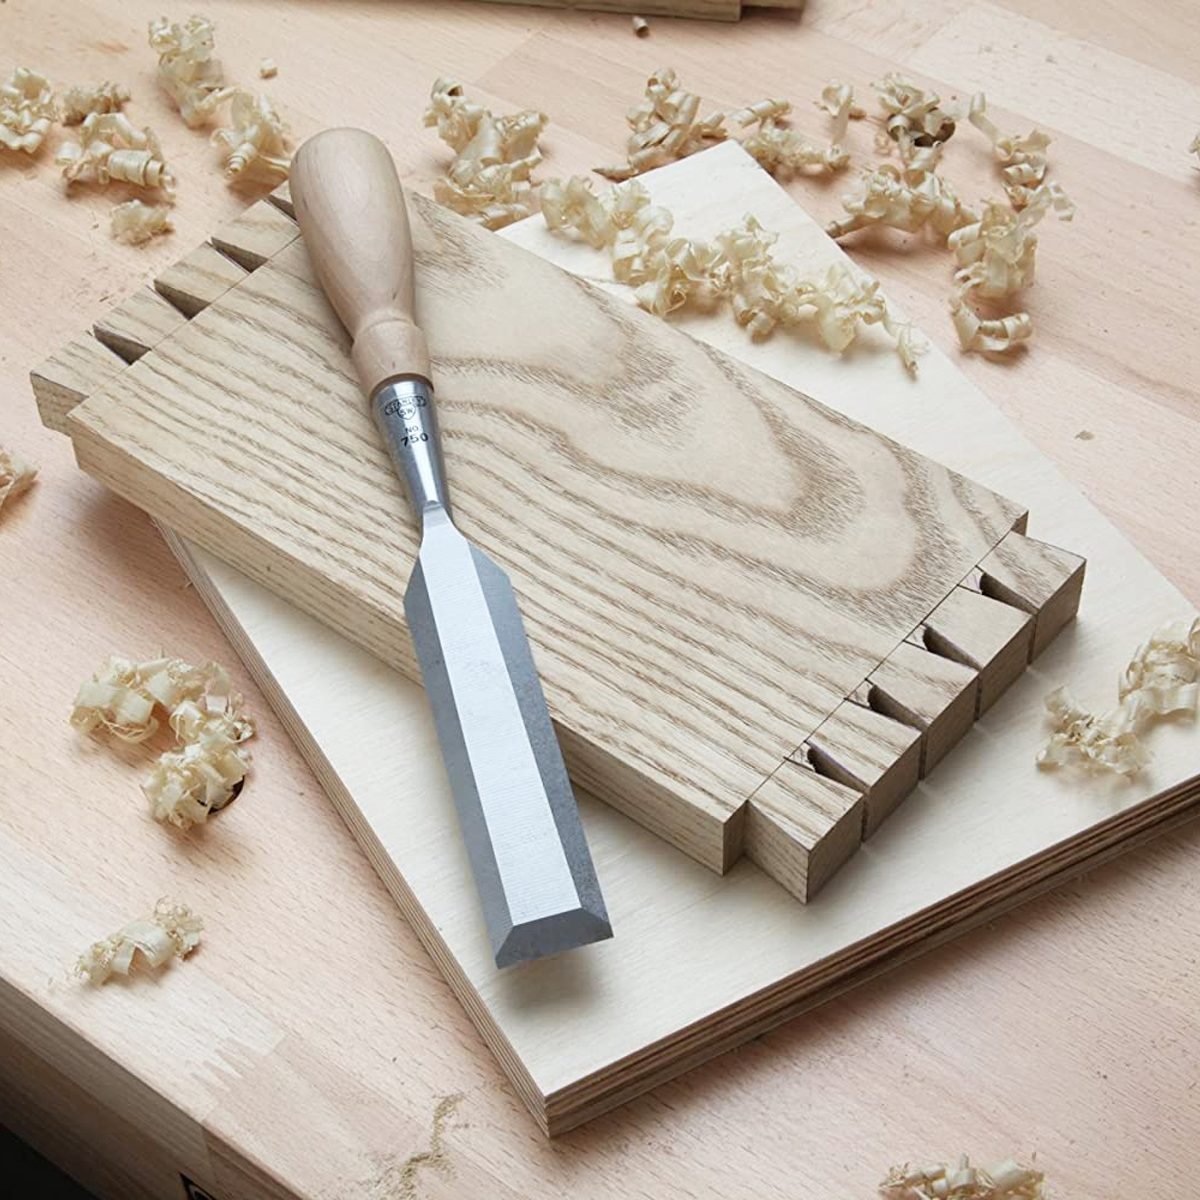 20 Woodworking Projects You Can Make as Gifts